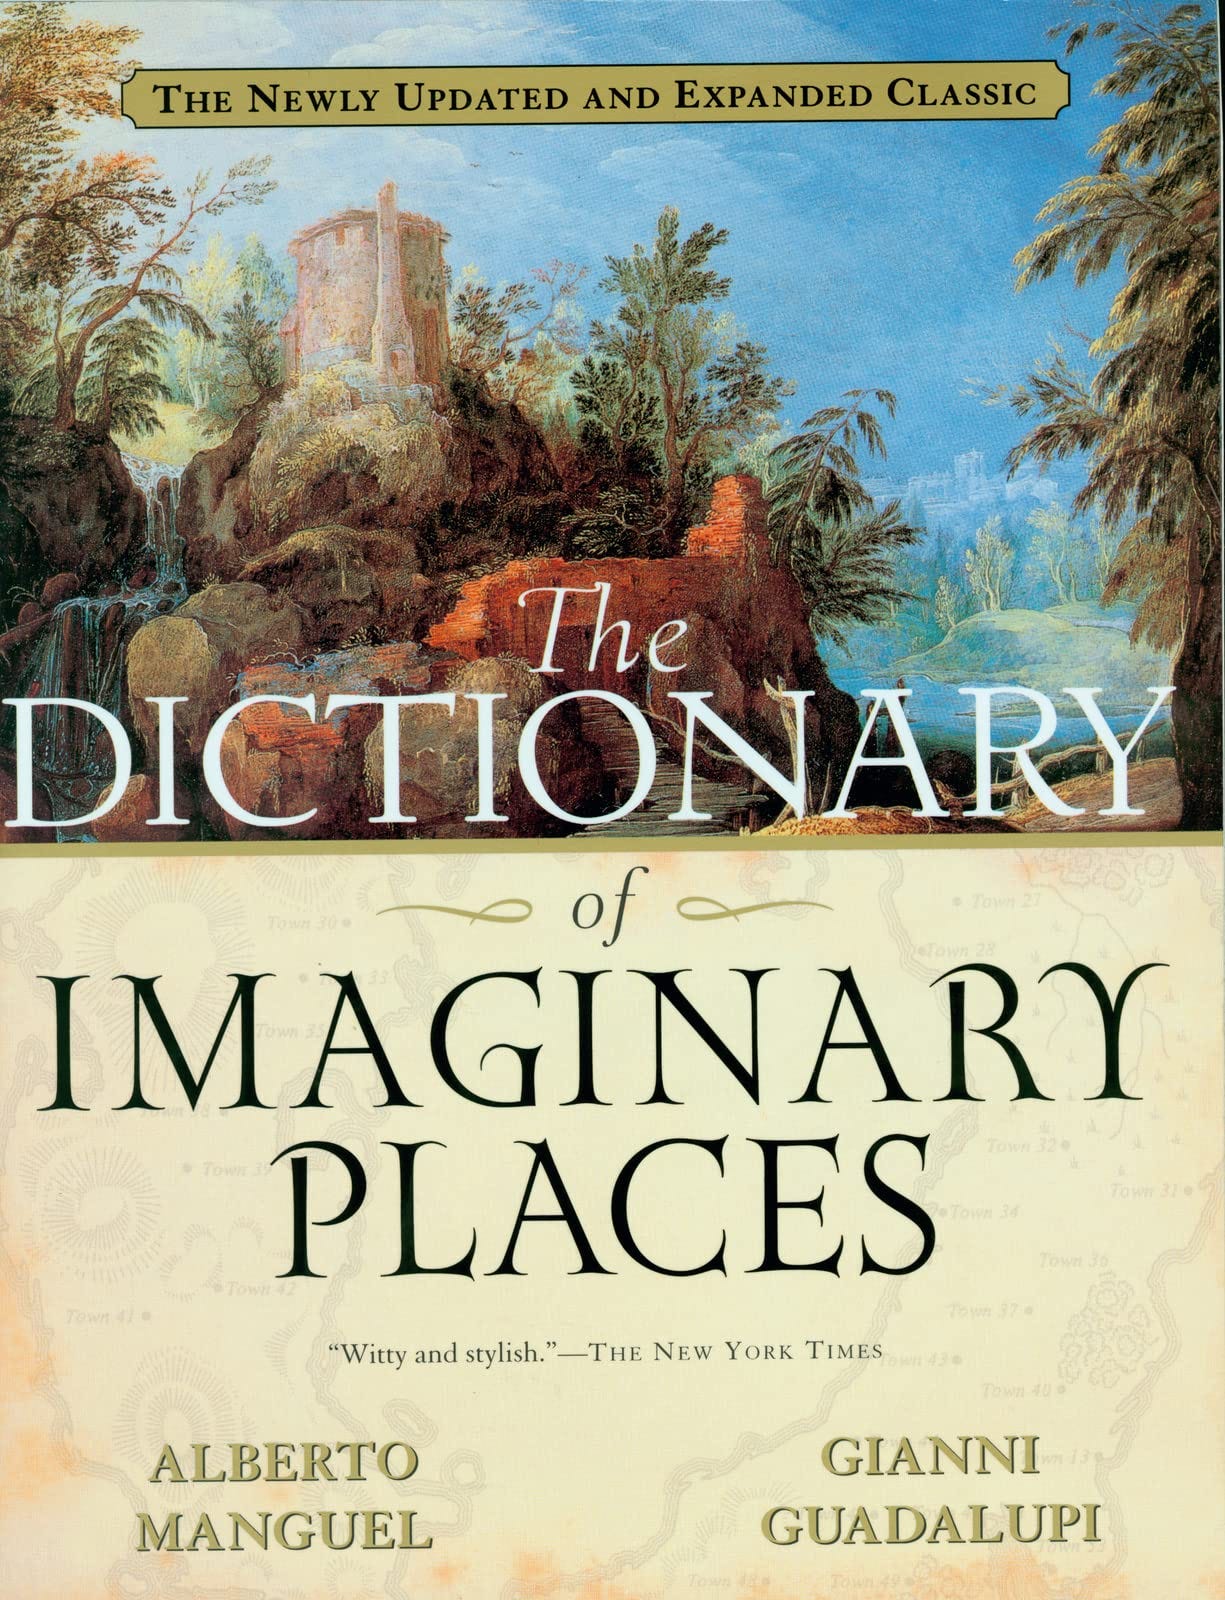 Amazon.com: The Dictionary of Imaginary Places: The Newly Updated and  Expanded Classic: 9780156008723: Alberto Manguel, Gianni Guadalupi, Graham  Greenfield, James Cook: Books